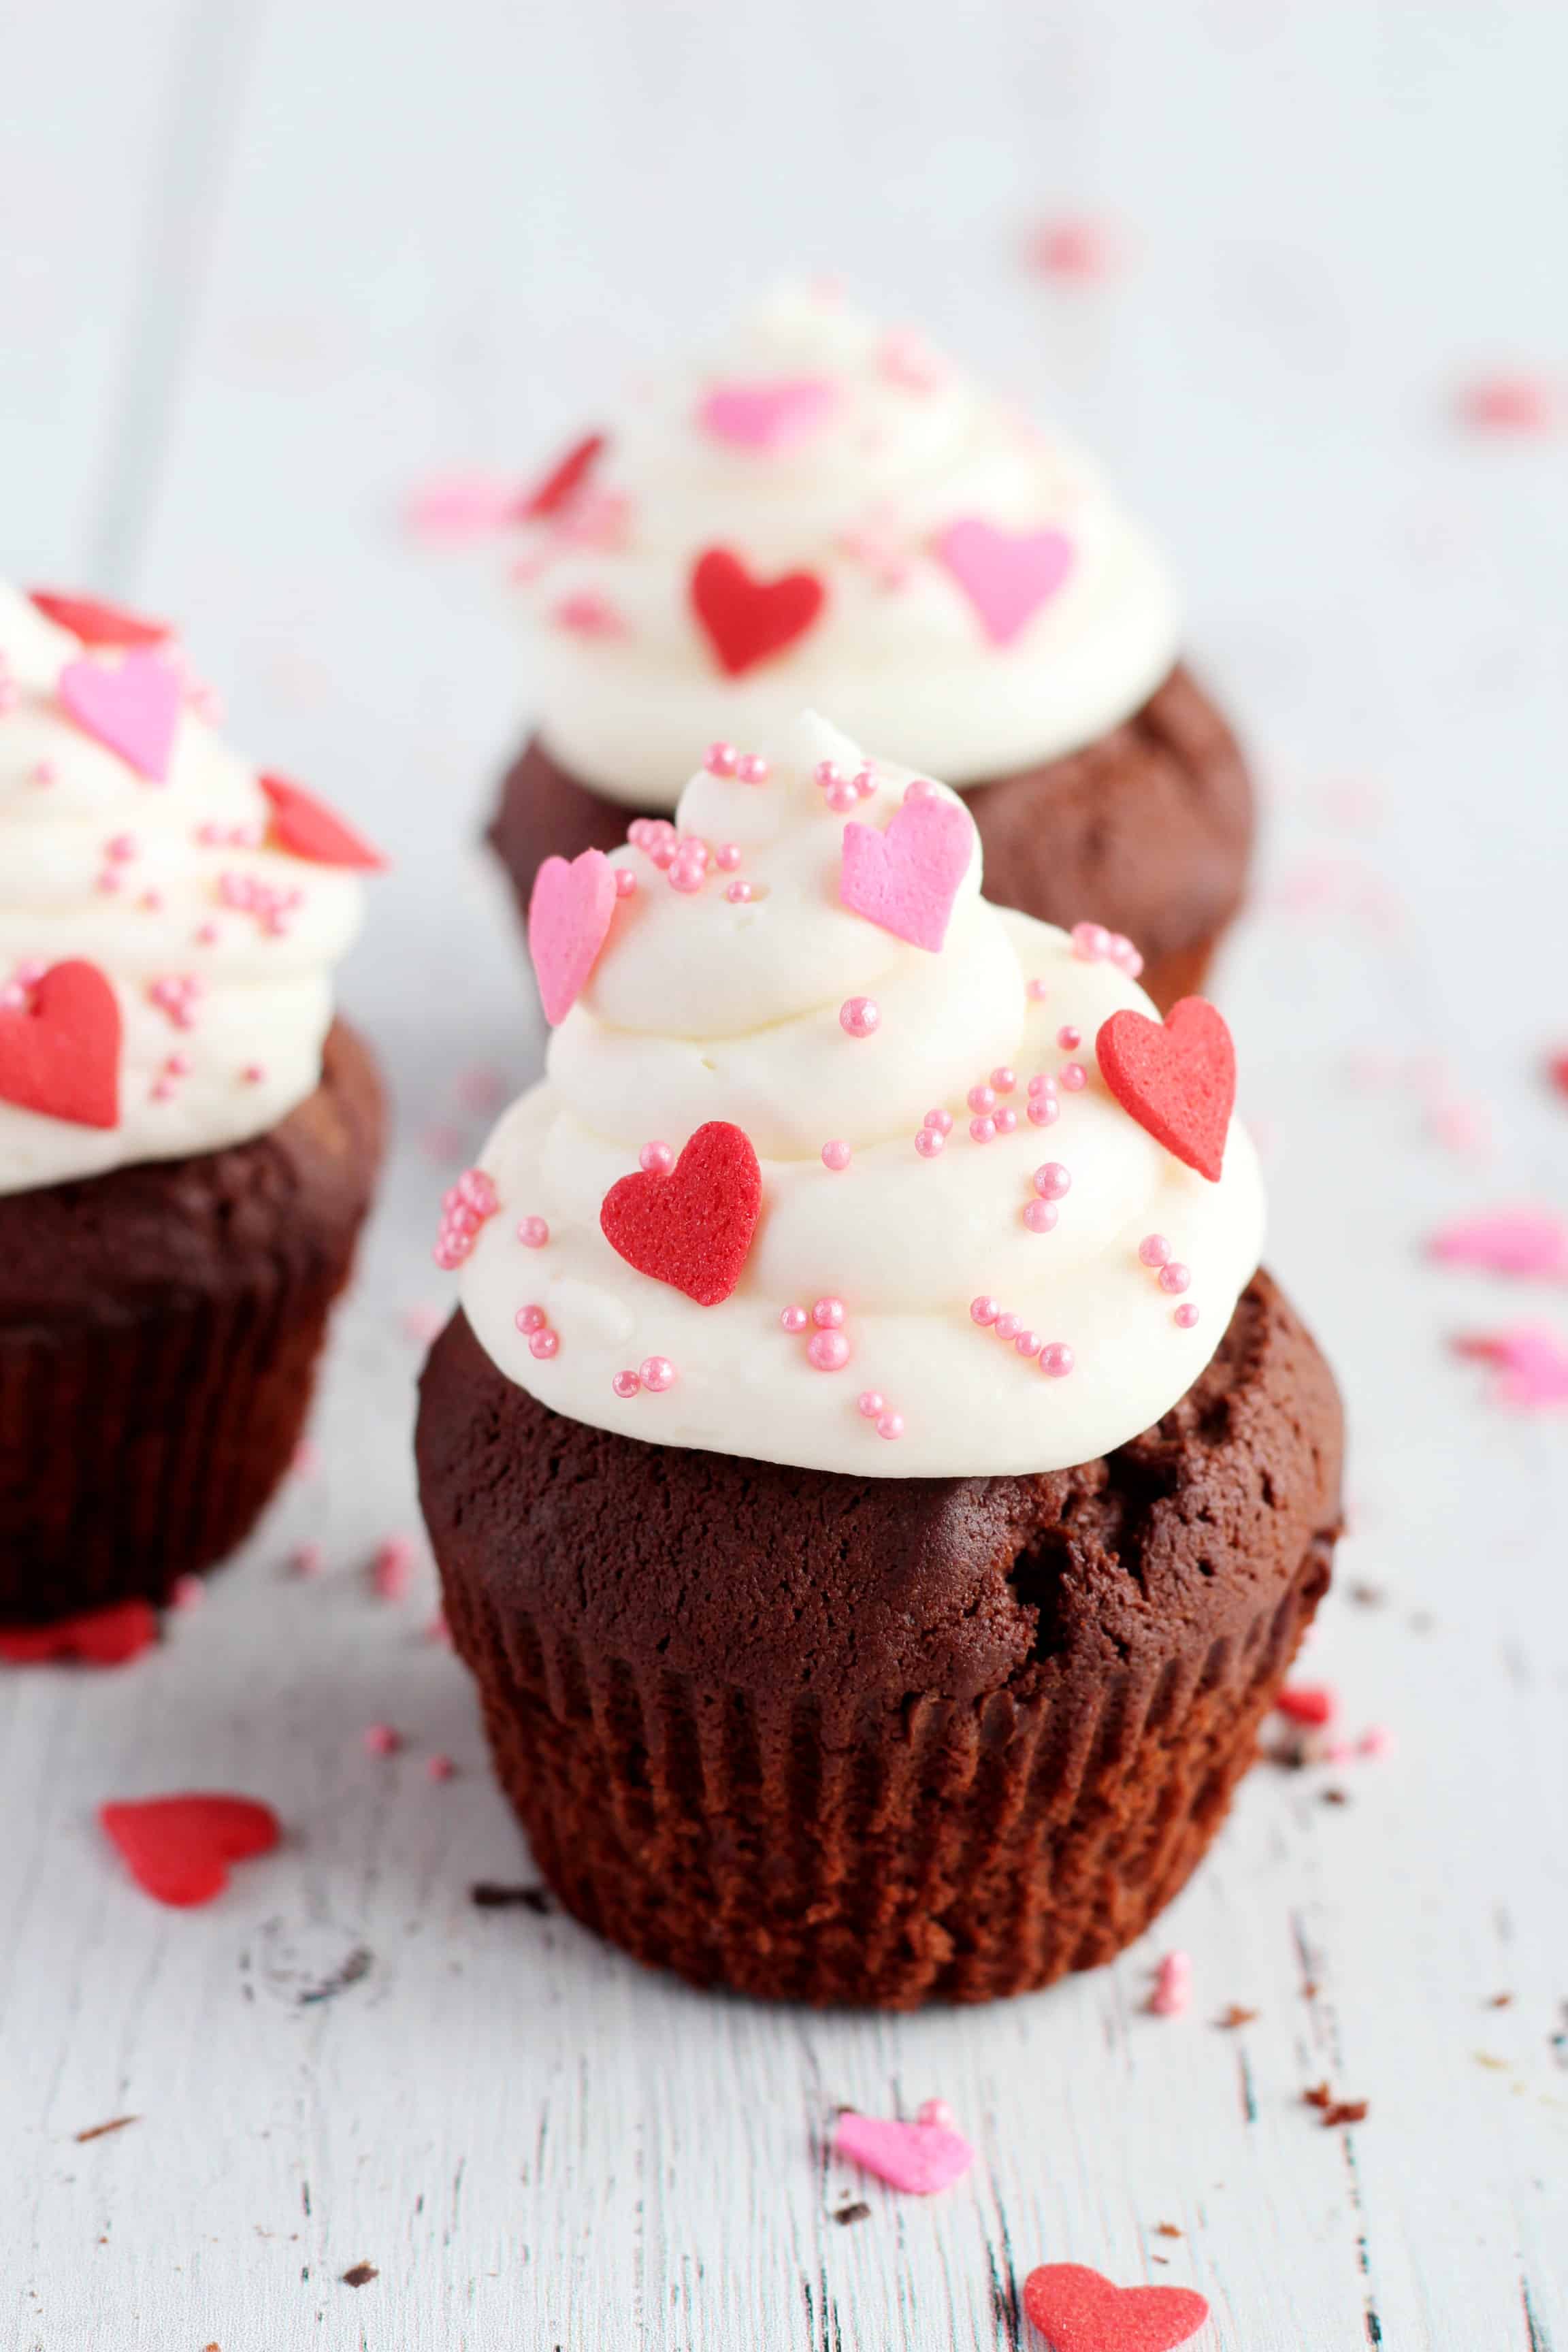 chocolate cupcakes with whipped cream on top and decorated with red and pink hearts